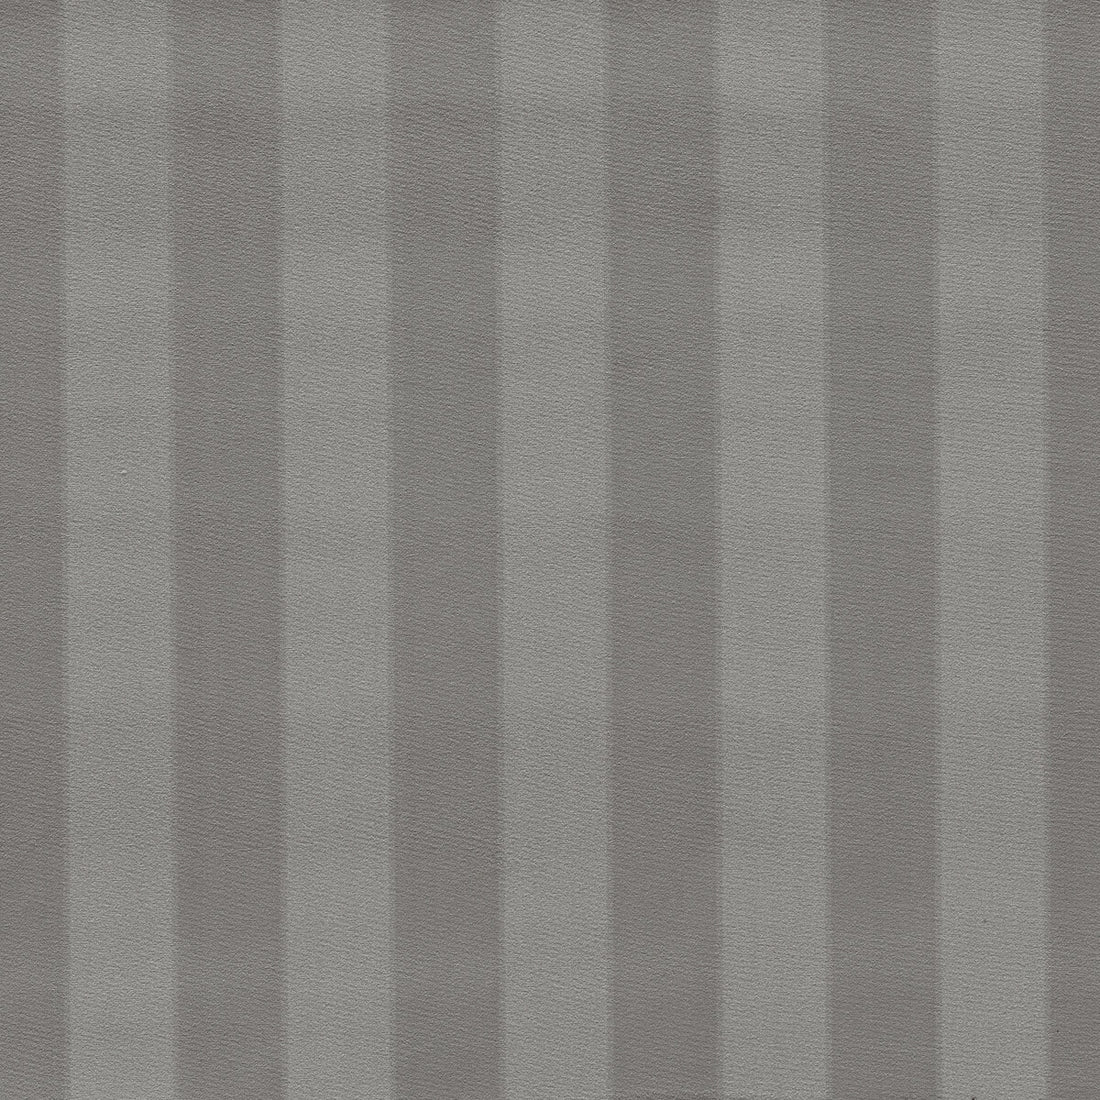 Haldon fabric in graphite color - pattern F1690/04.CAC.0 - by Clarke And Clarke in the Whitworth collection